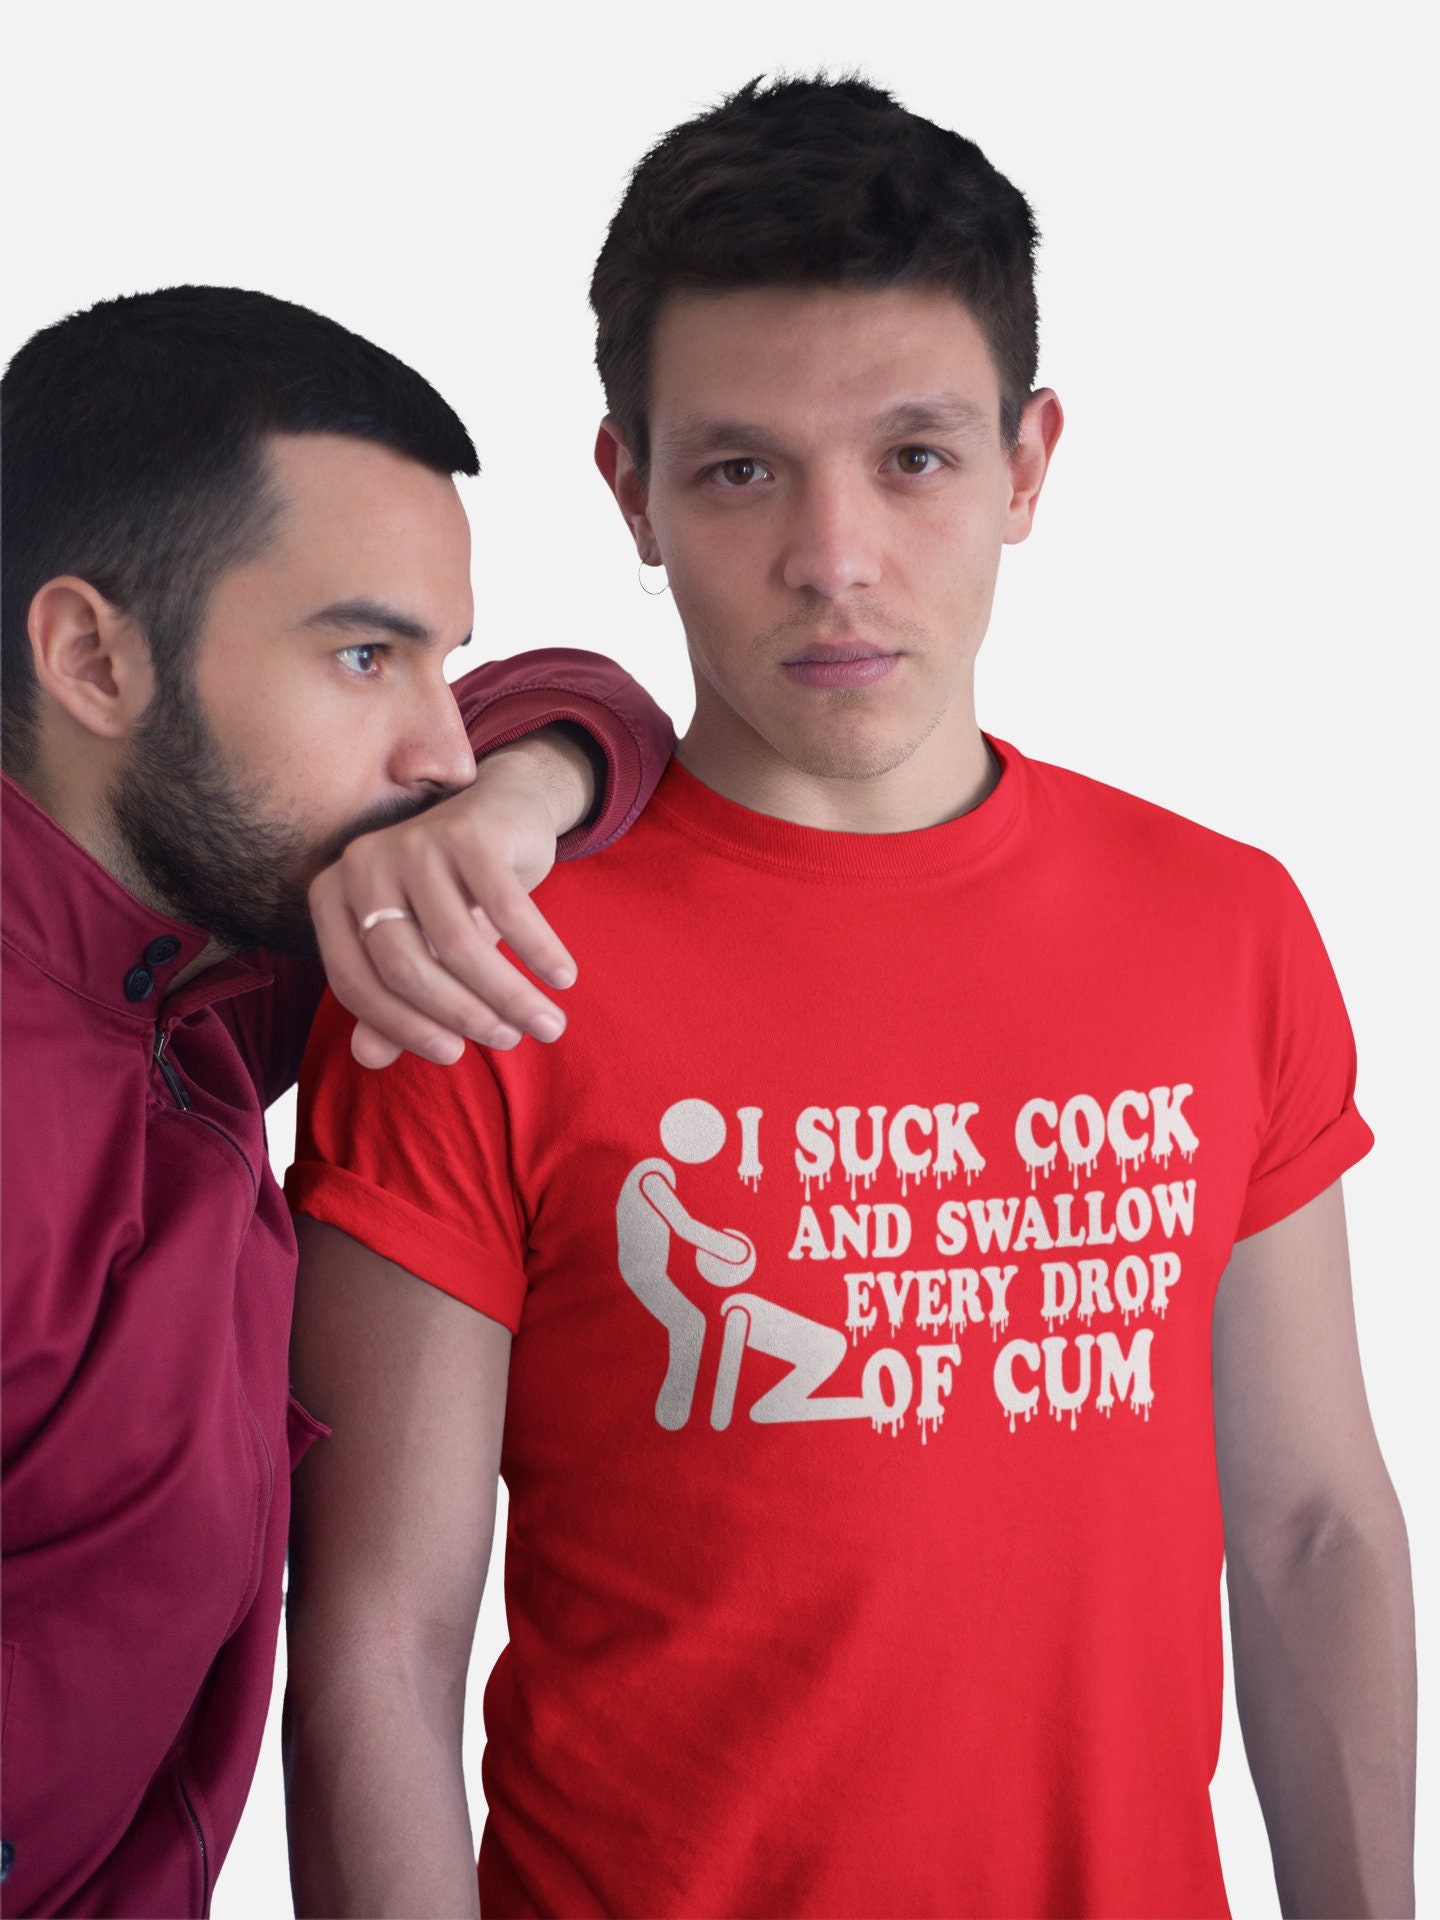 I Suck Cock Swallow Every Drop of Cum LGBT Shirt pic image